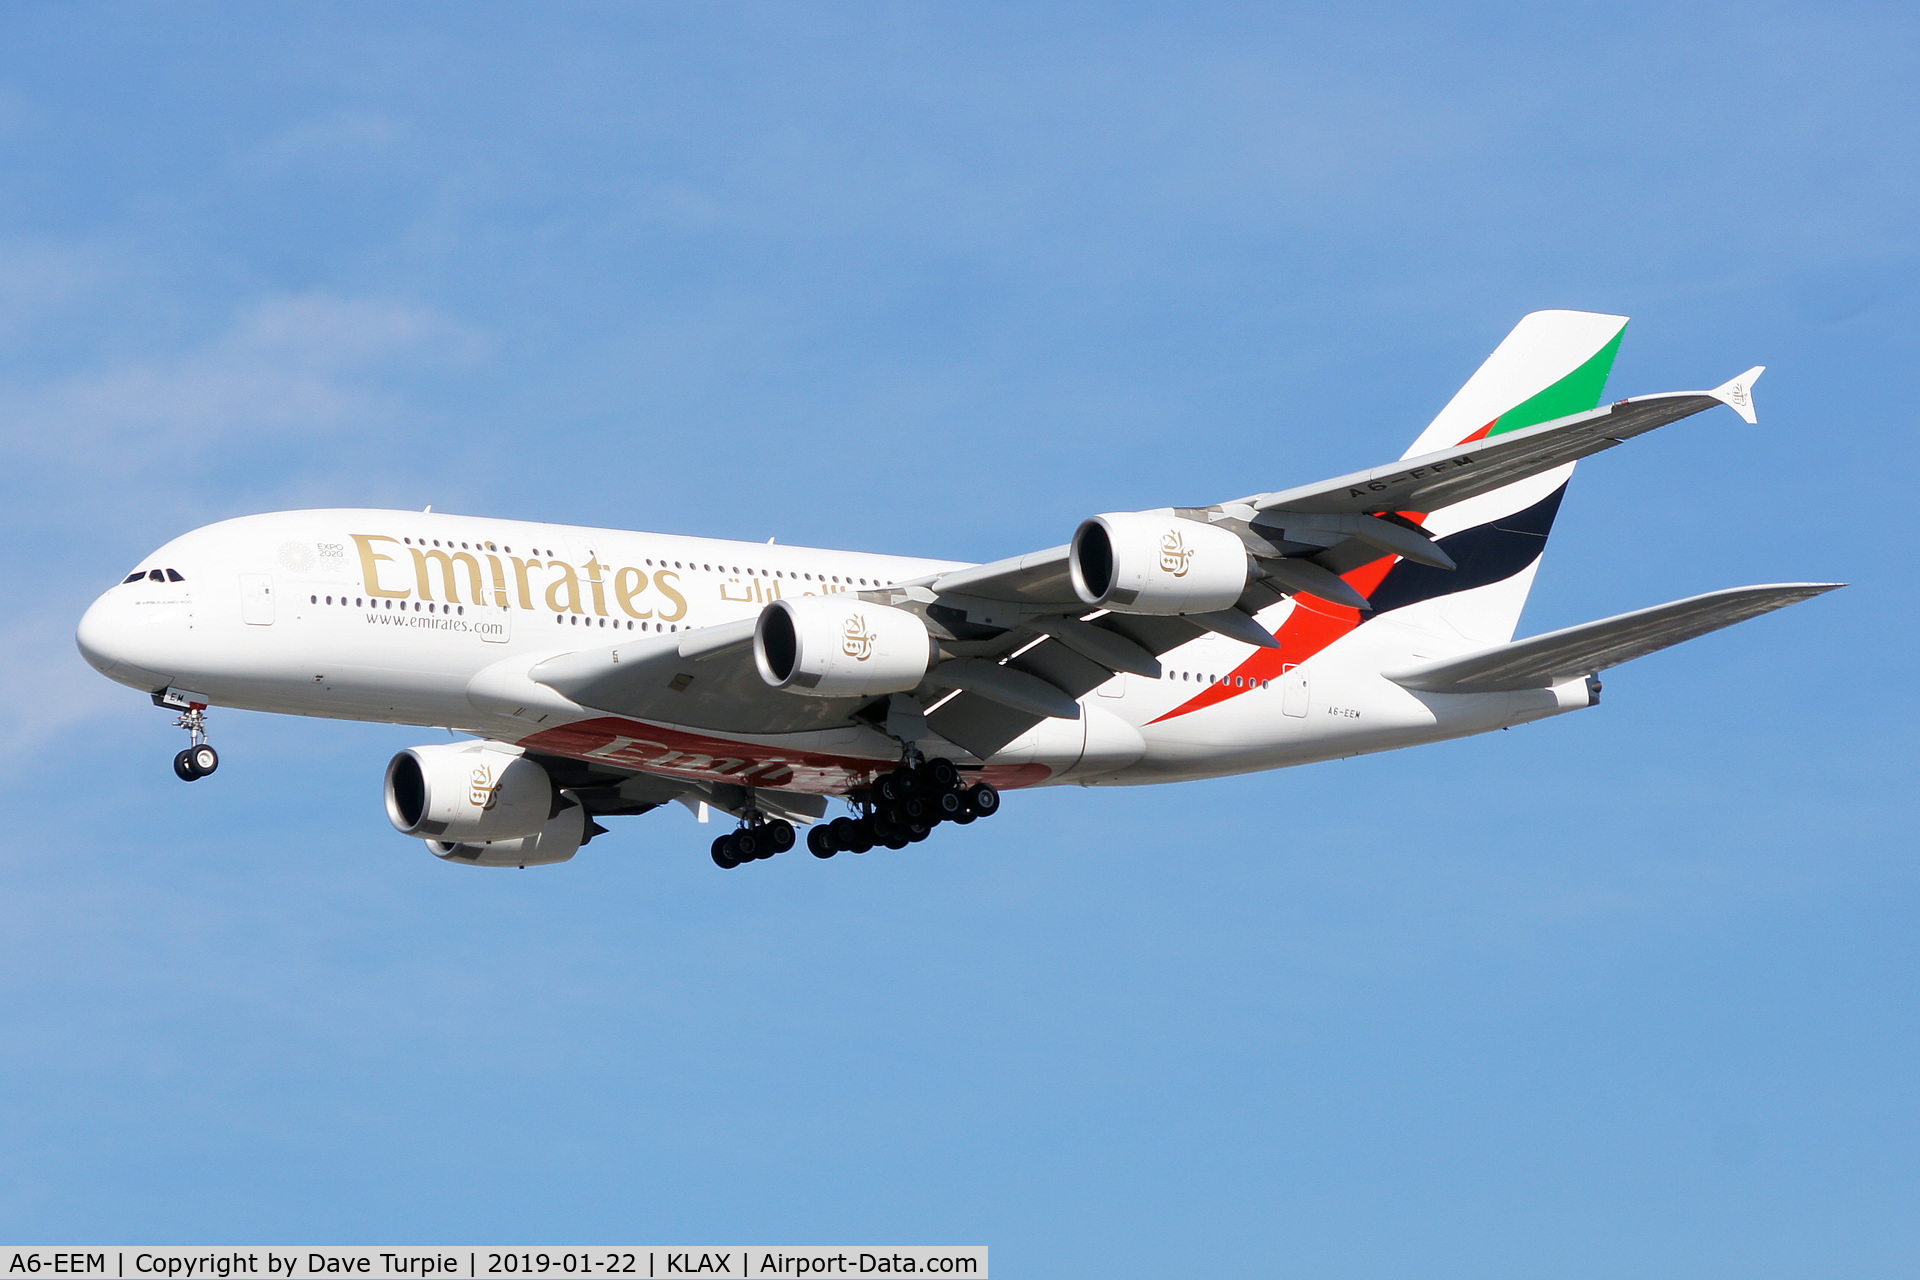 A6-EEM, 2013 Airbus A380-861 C/N 134, No comment.